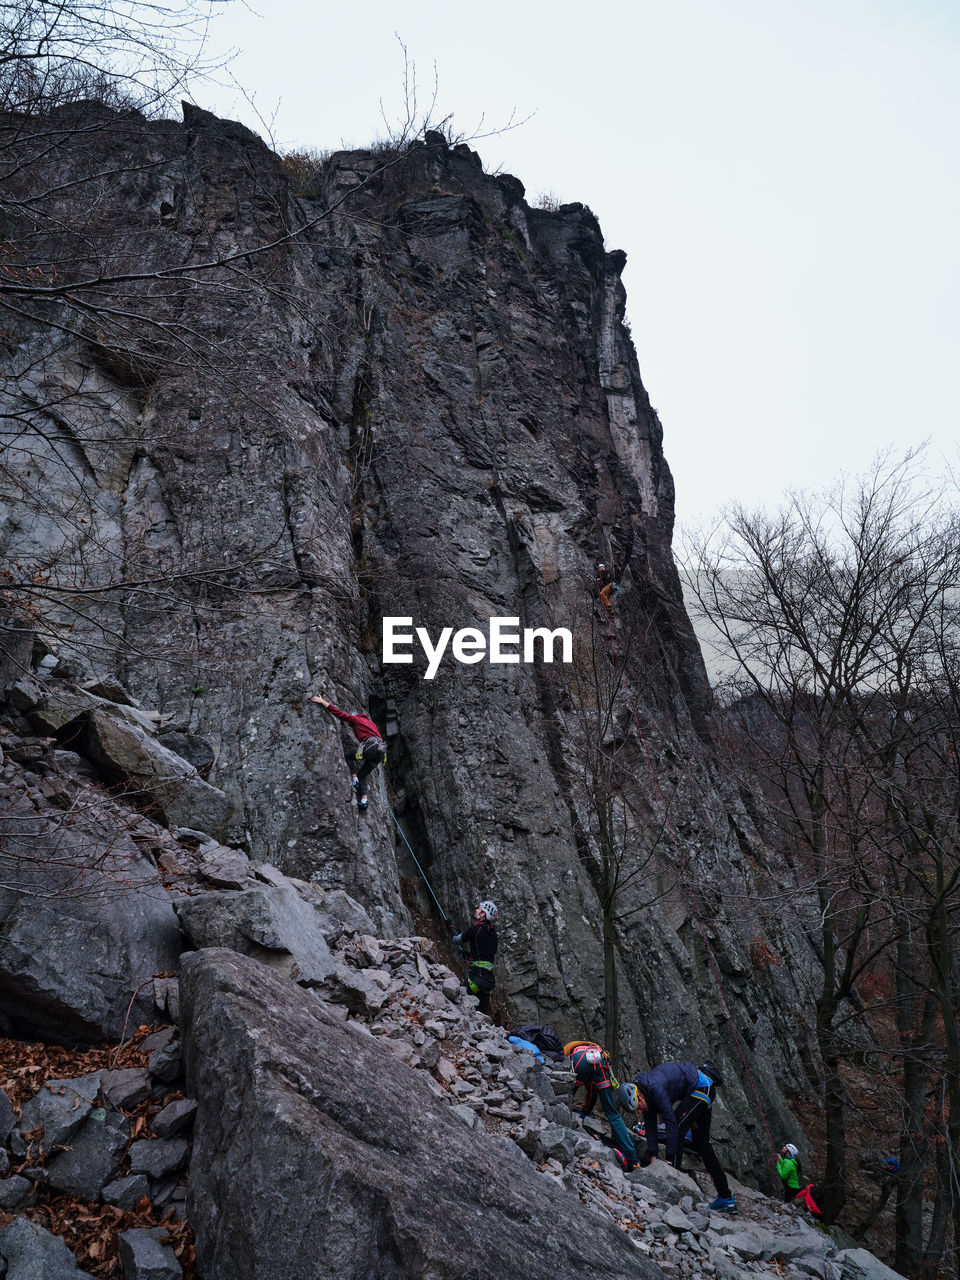 A group of young climbers climb together on a rock, Hradok pod Vtacnikom, Slovakia Rock High Low Angle View Danger Safe Rope Friend Secure Climb Climber Climbers Activity Sport Outdoors Day Sky Group